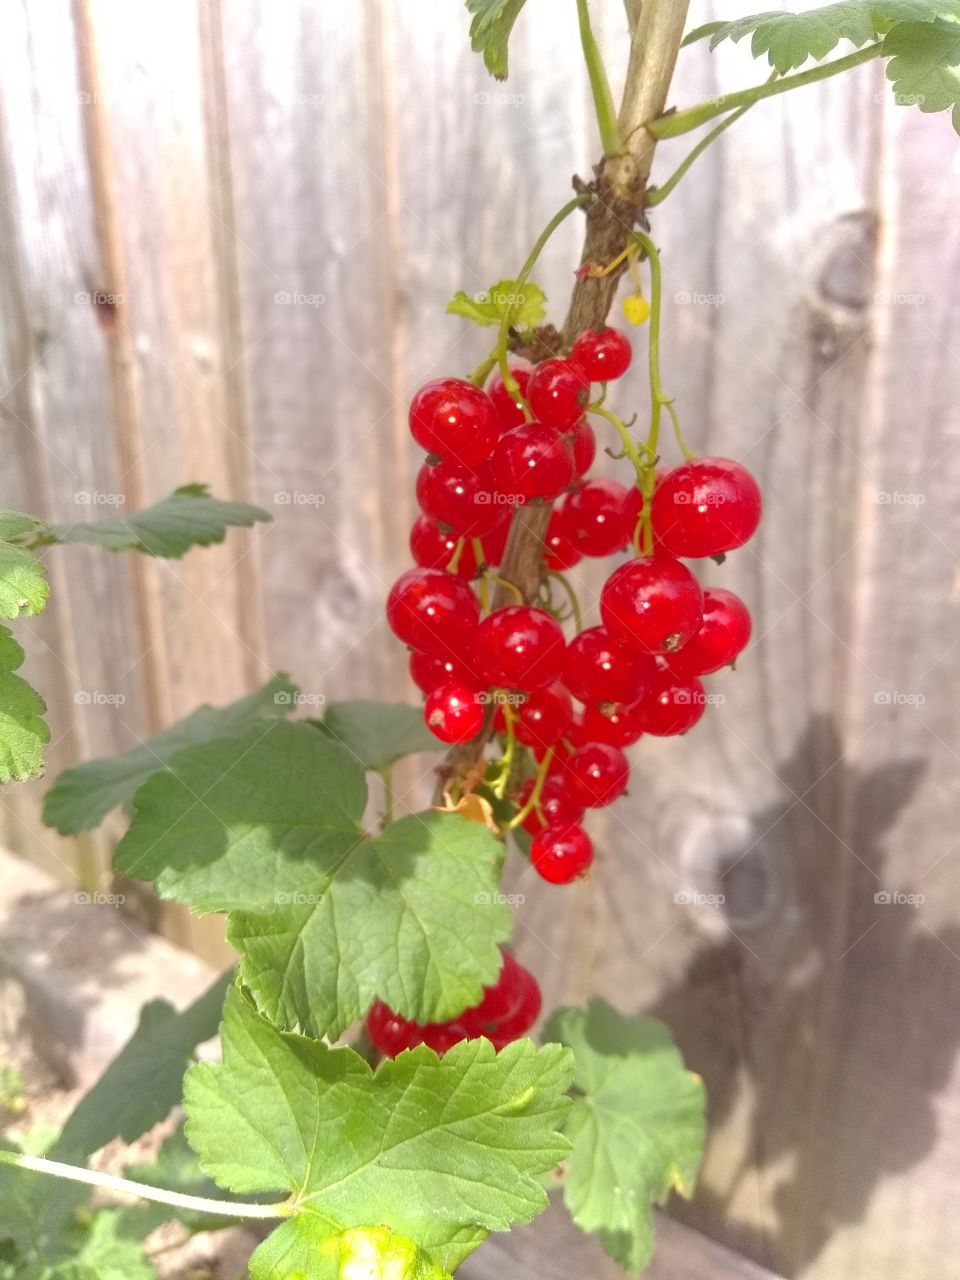 Red currents